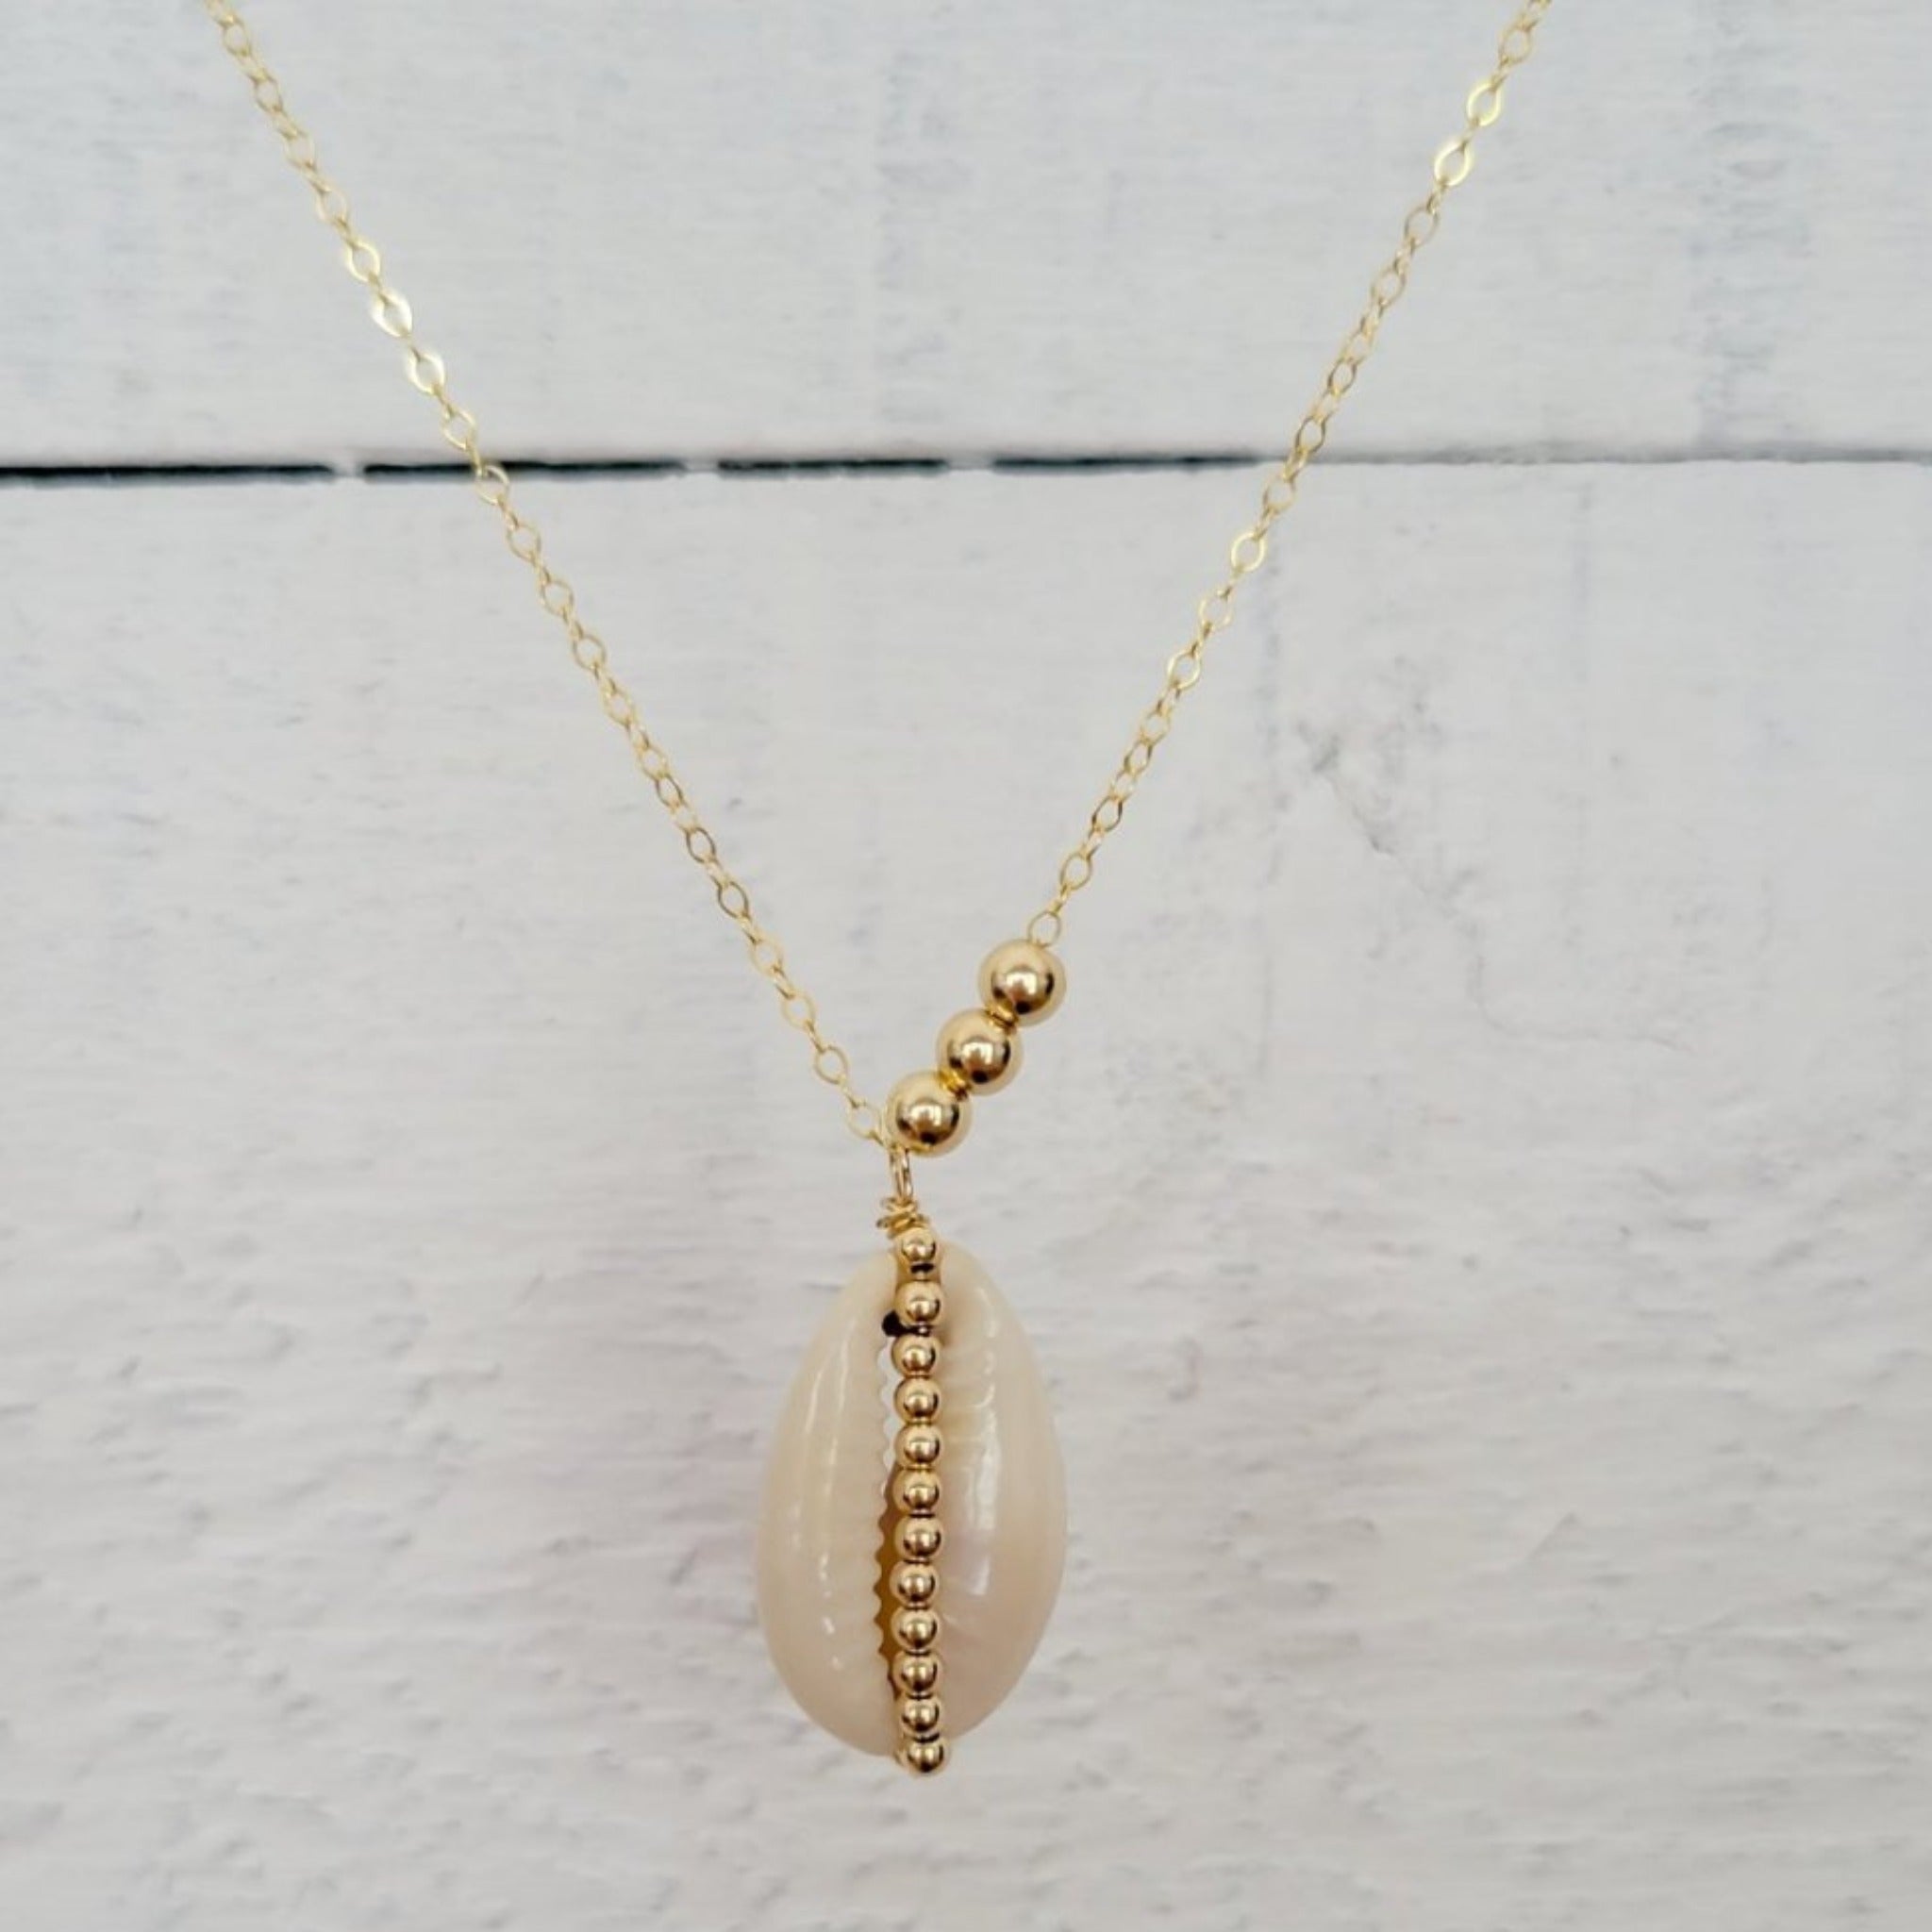 Natural Cowrie Shell and Dot Necklace - Small, Med, or Large - Sterling or Gold